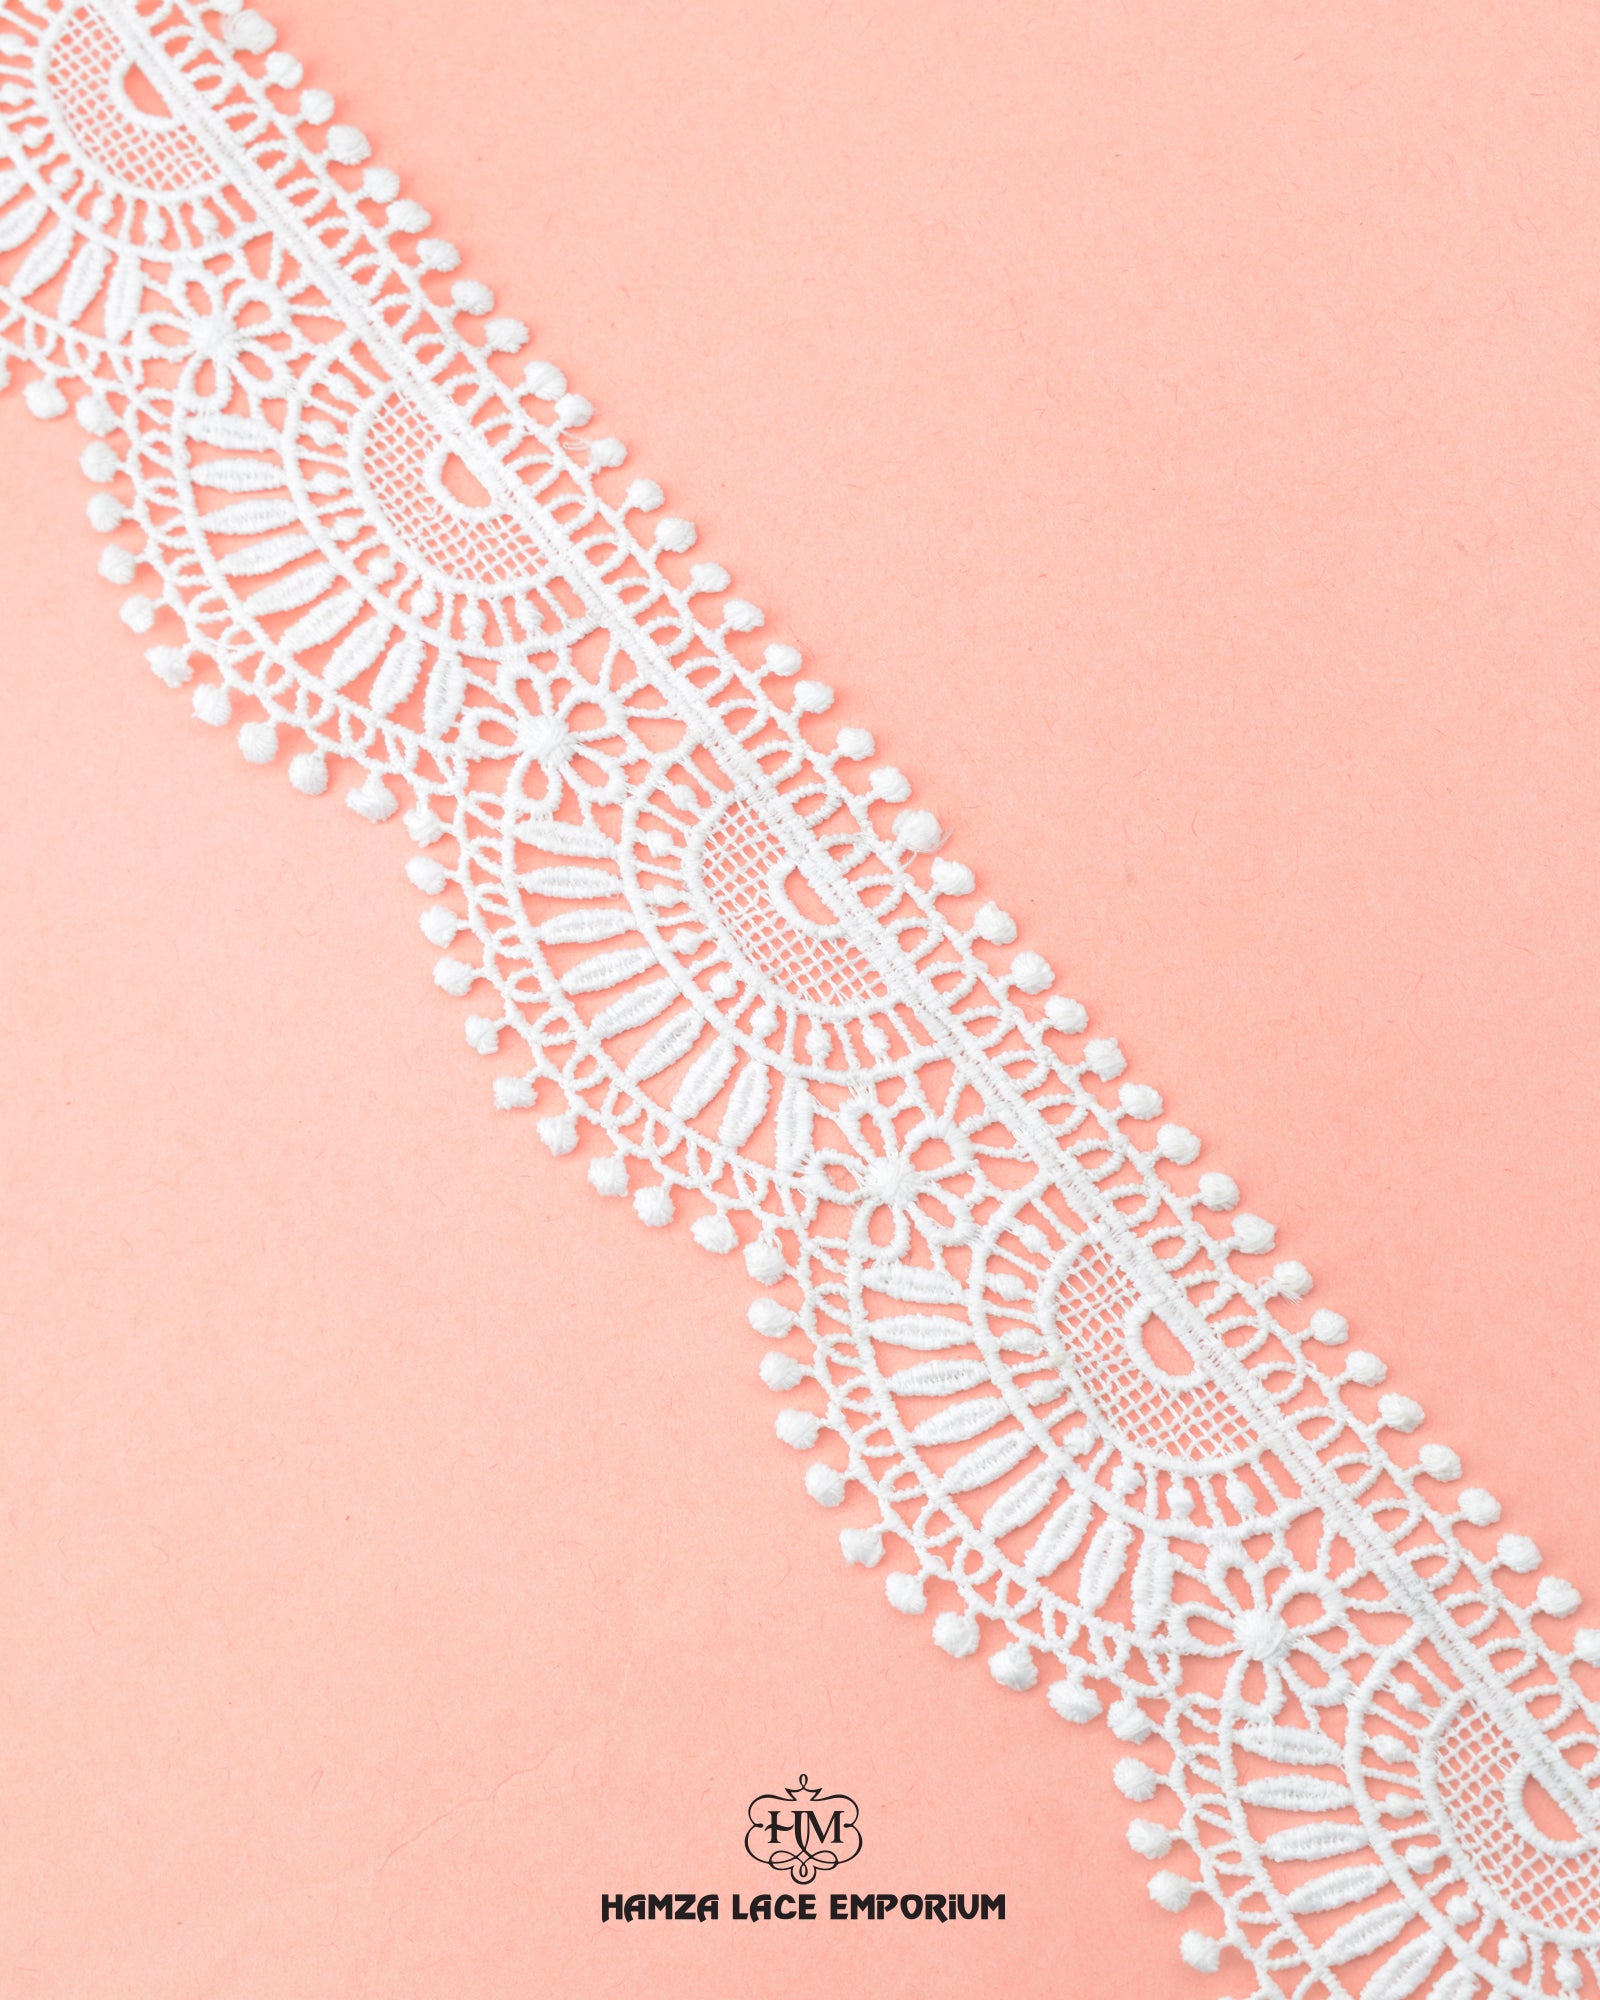 The 'Edging Scallop Lace 5335' with the brand name 'Hamza Lace' and logo